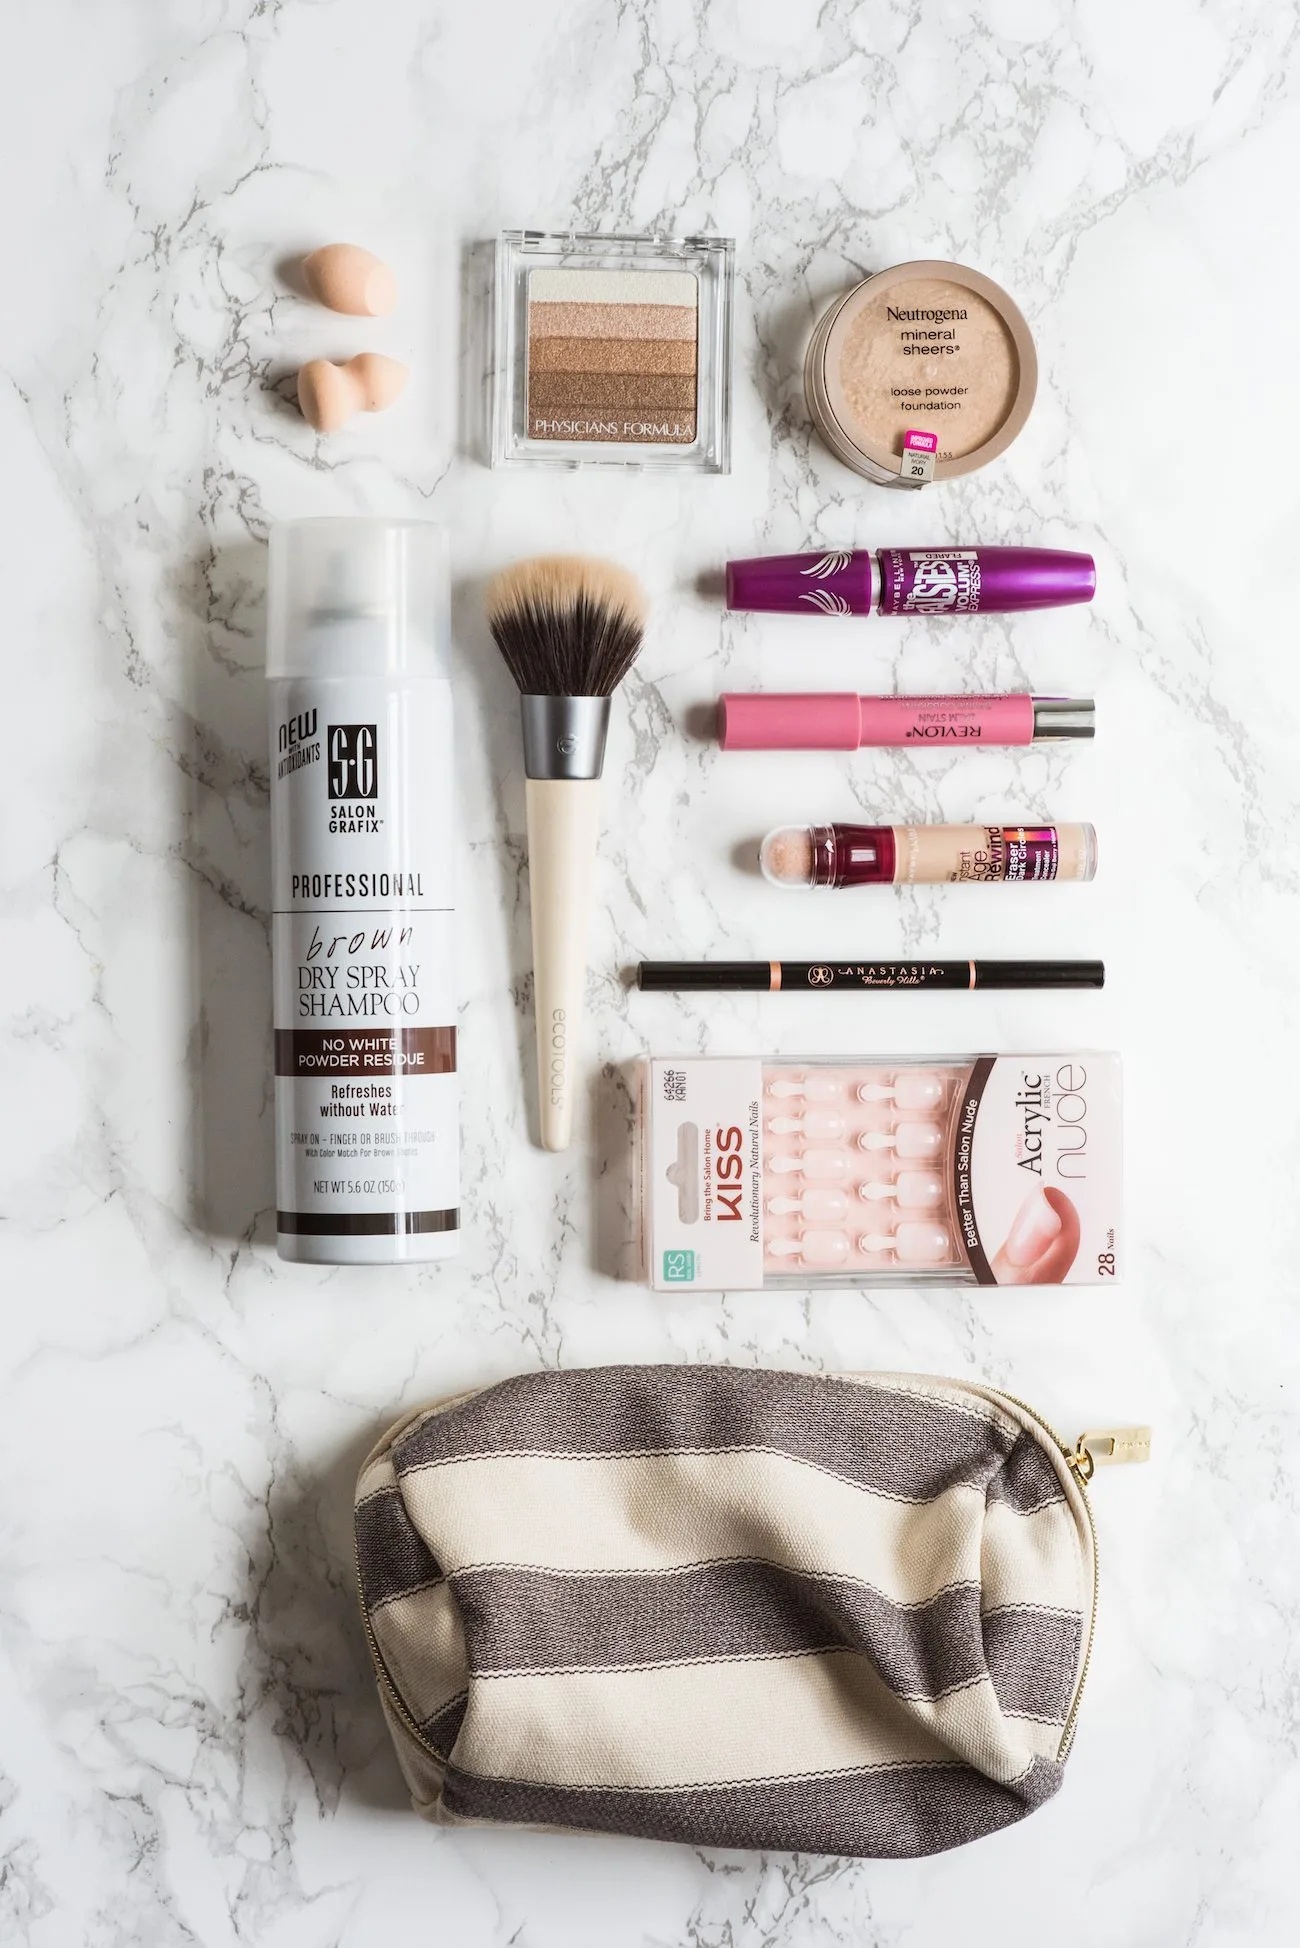 My 10 Favorite Everyday Beauty Products from @cydconverse